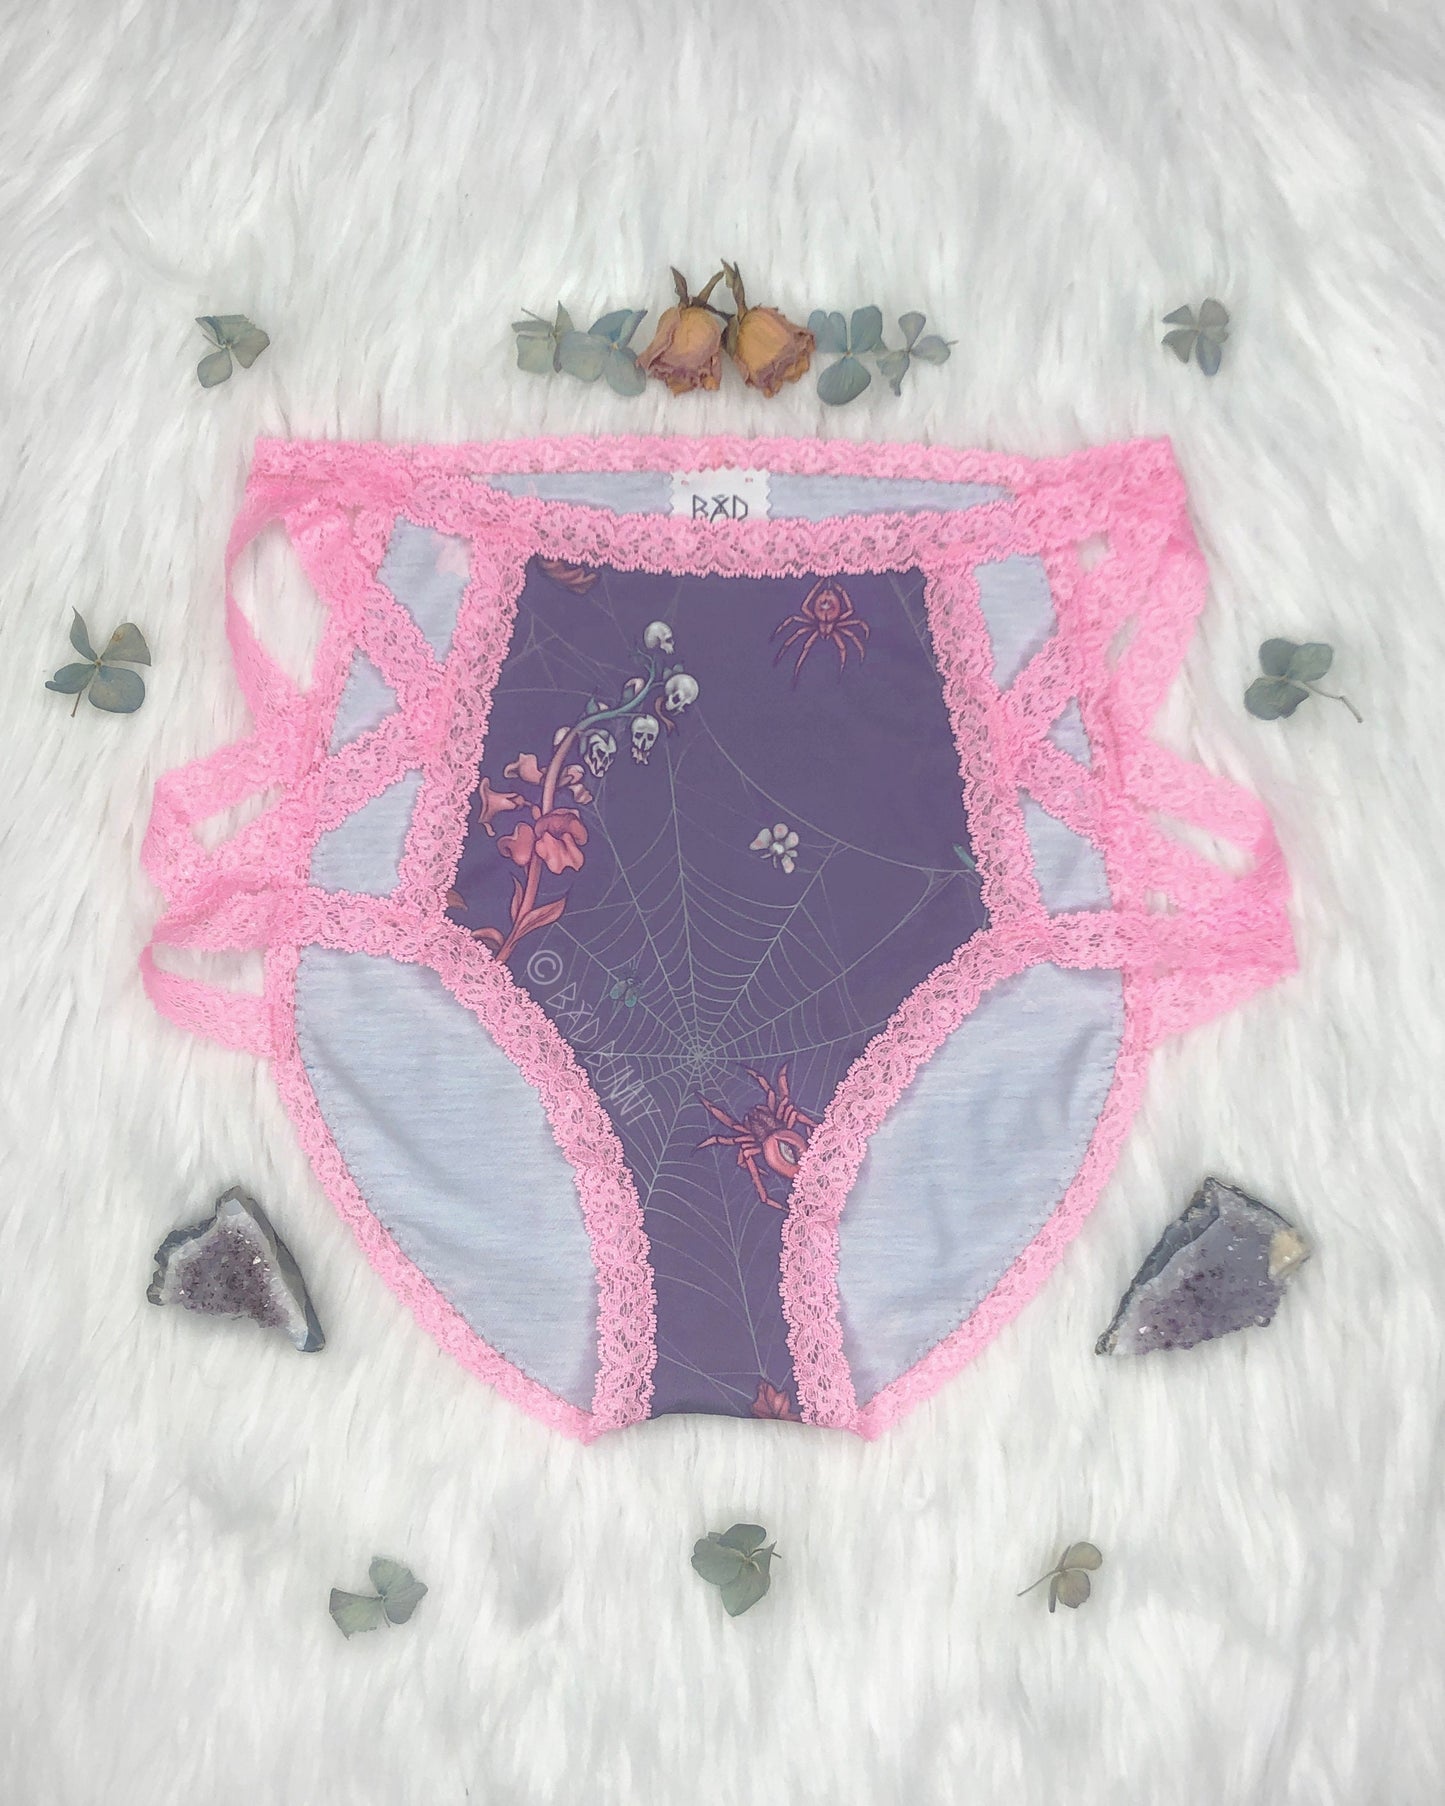 Lace High-waisted Undies - Lavender Webs - MTO